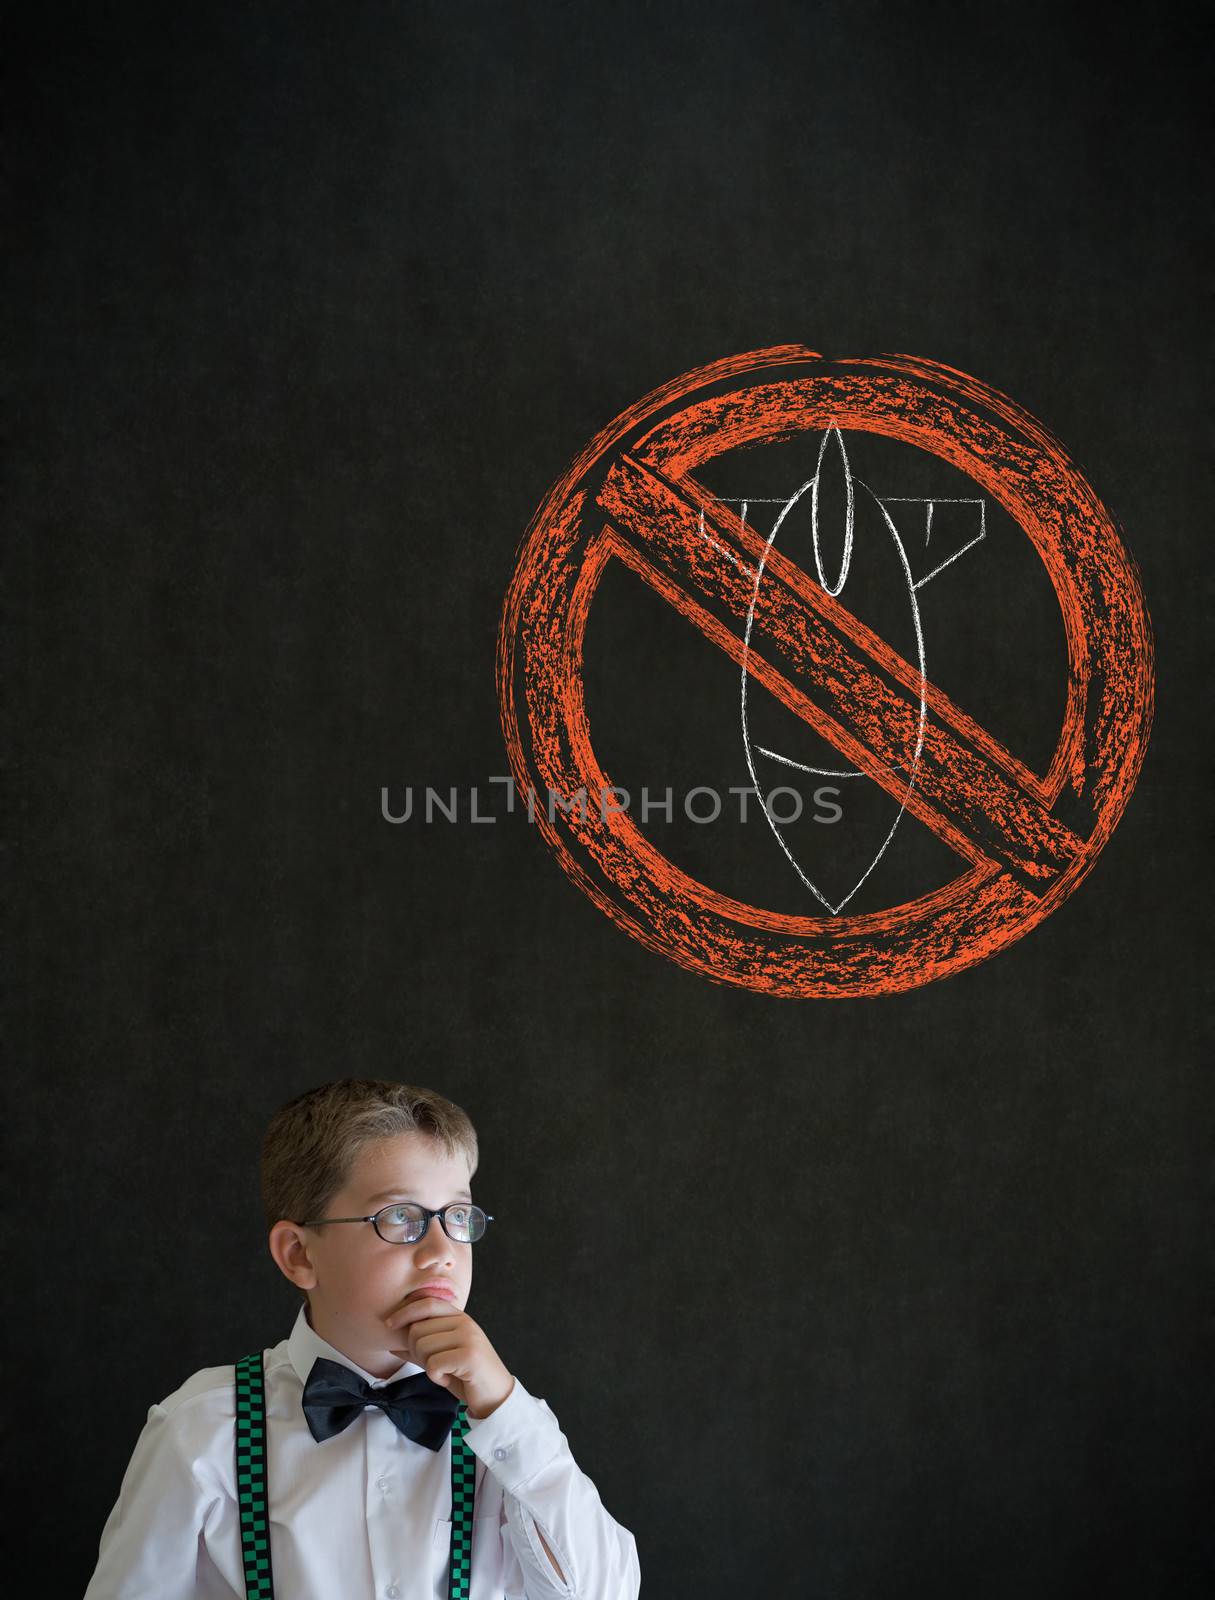 Thinking boy dressed up as business man with politician no bombs war pacifist sign on blackboard background